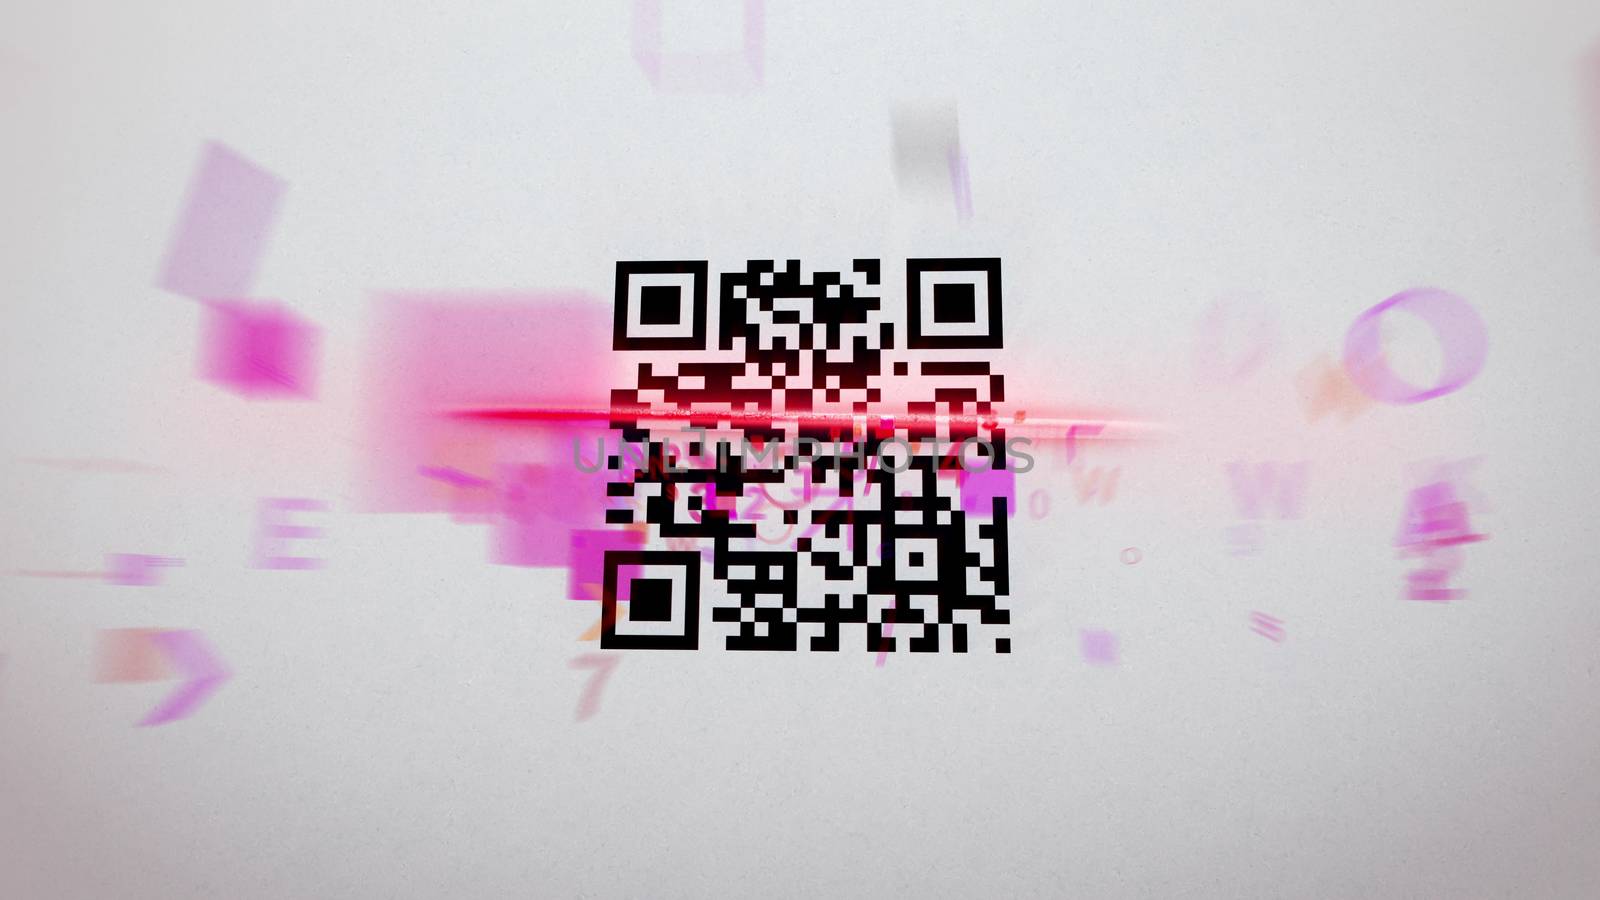 Fuzzy 3d illustration of an abstract QR code scanning procedure with rushing symbols, numbers, figures of a pink color. The black and white code is covered with a red laser line